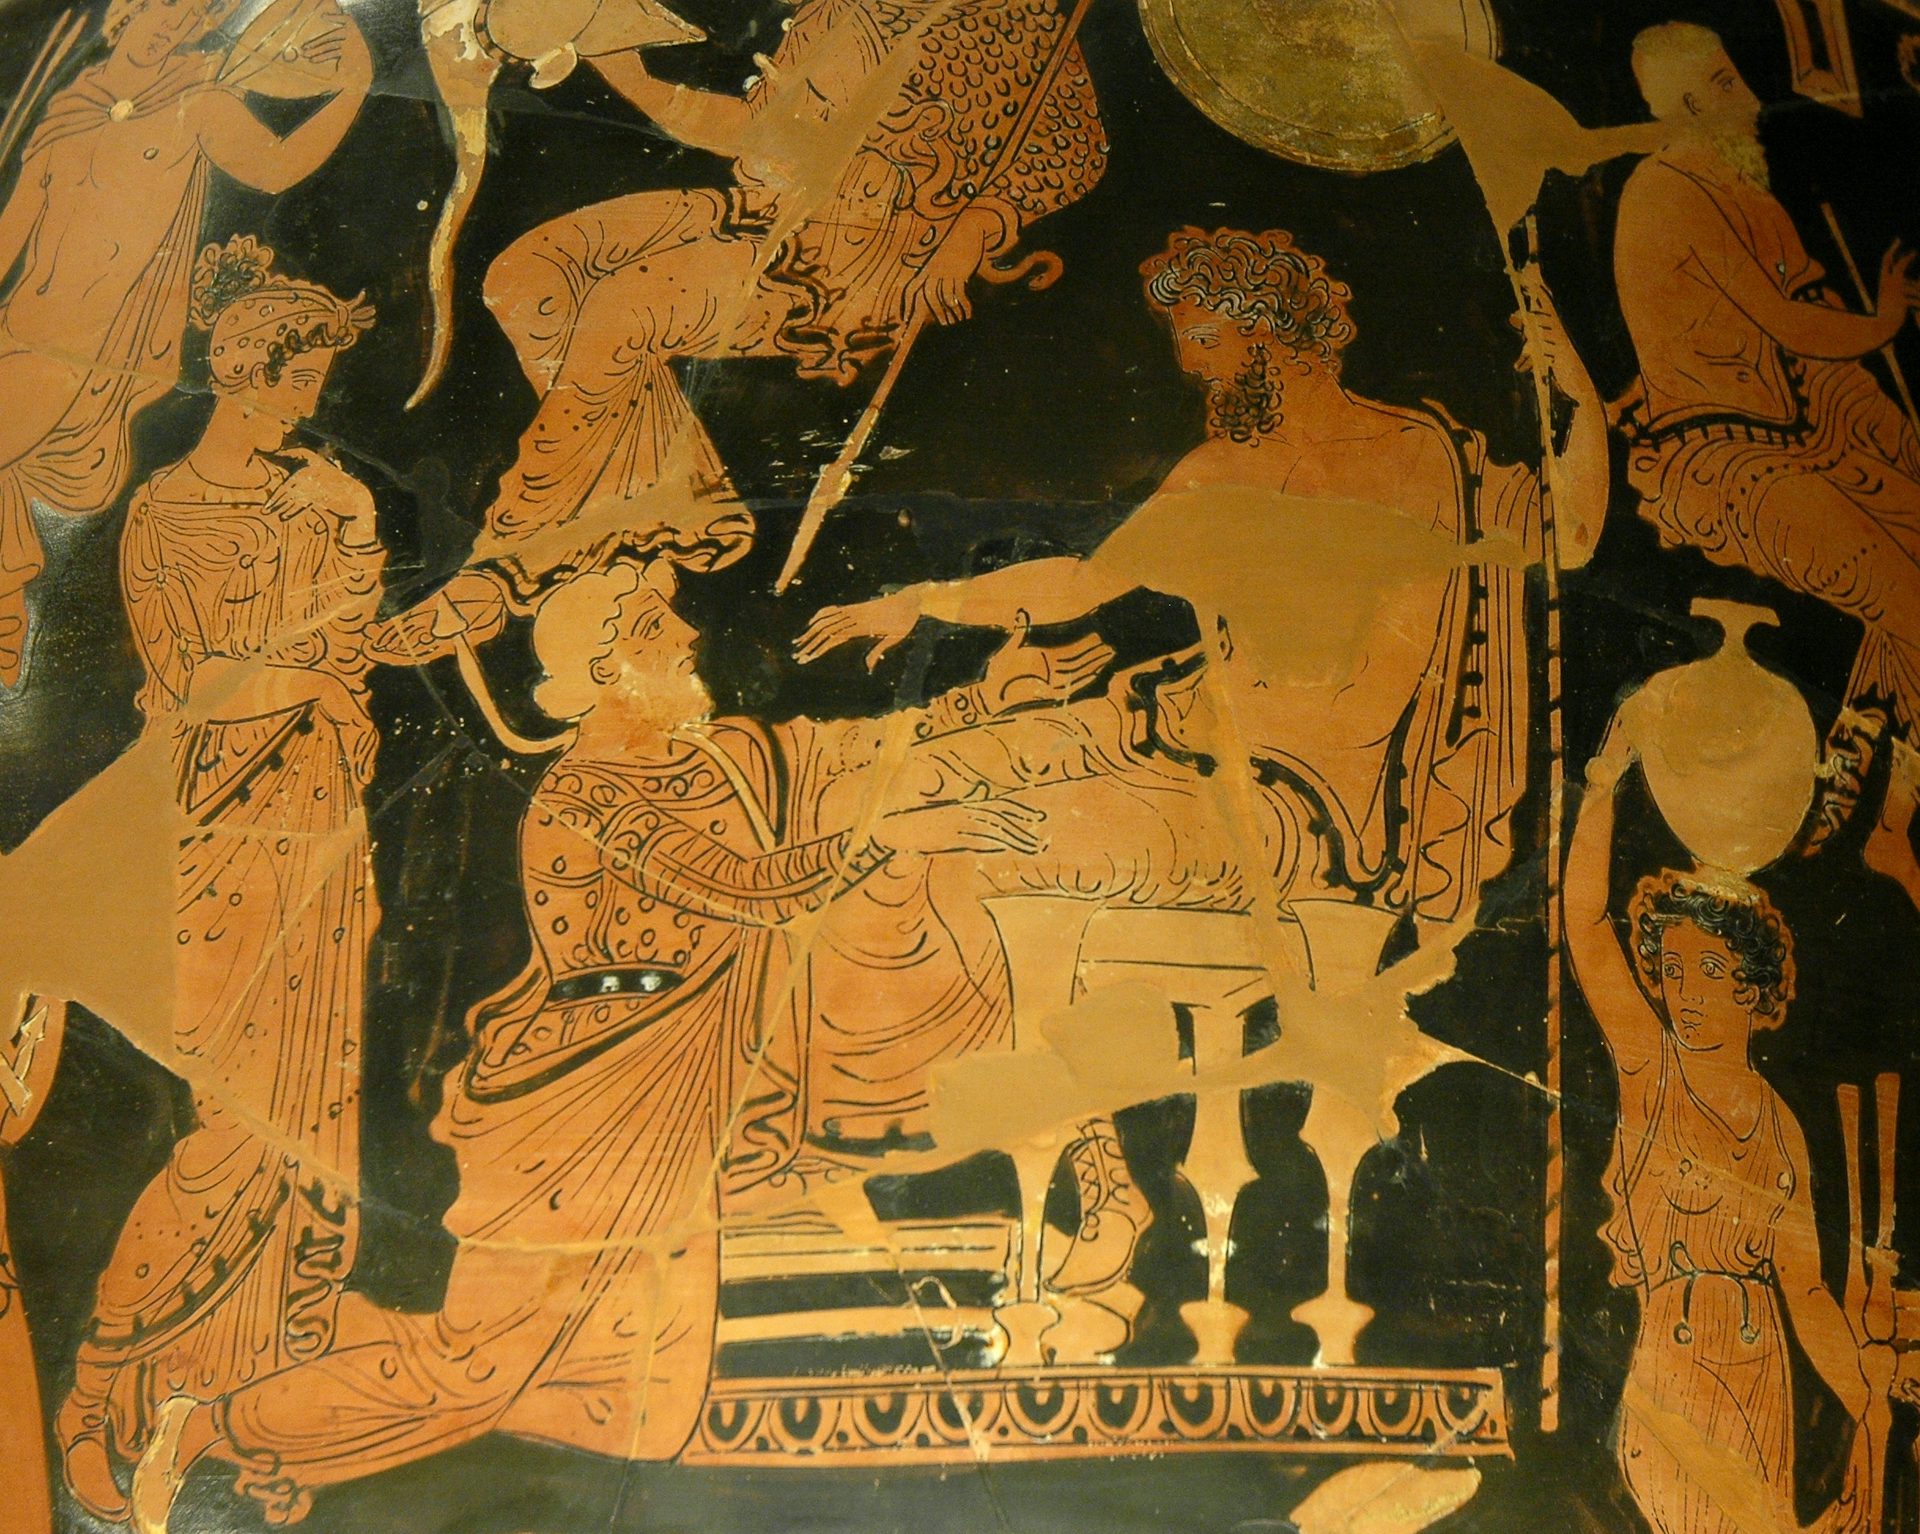 Vase painting of Chryses trying to ransom his daughter Chryseis from Agamemnon by the Painter of Athens 1714